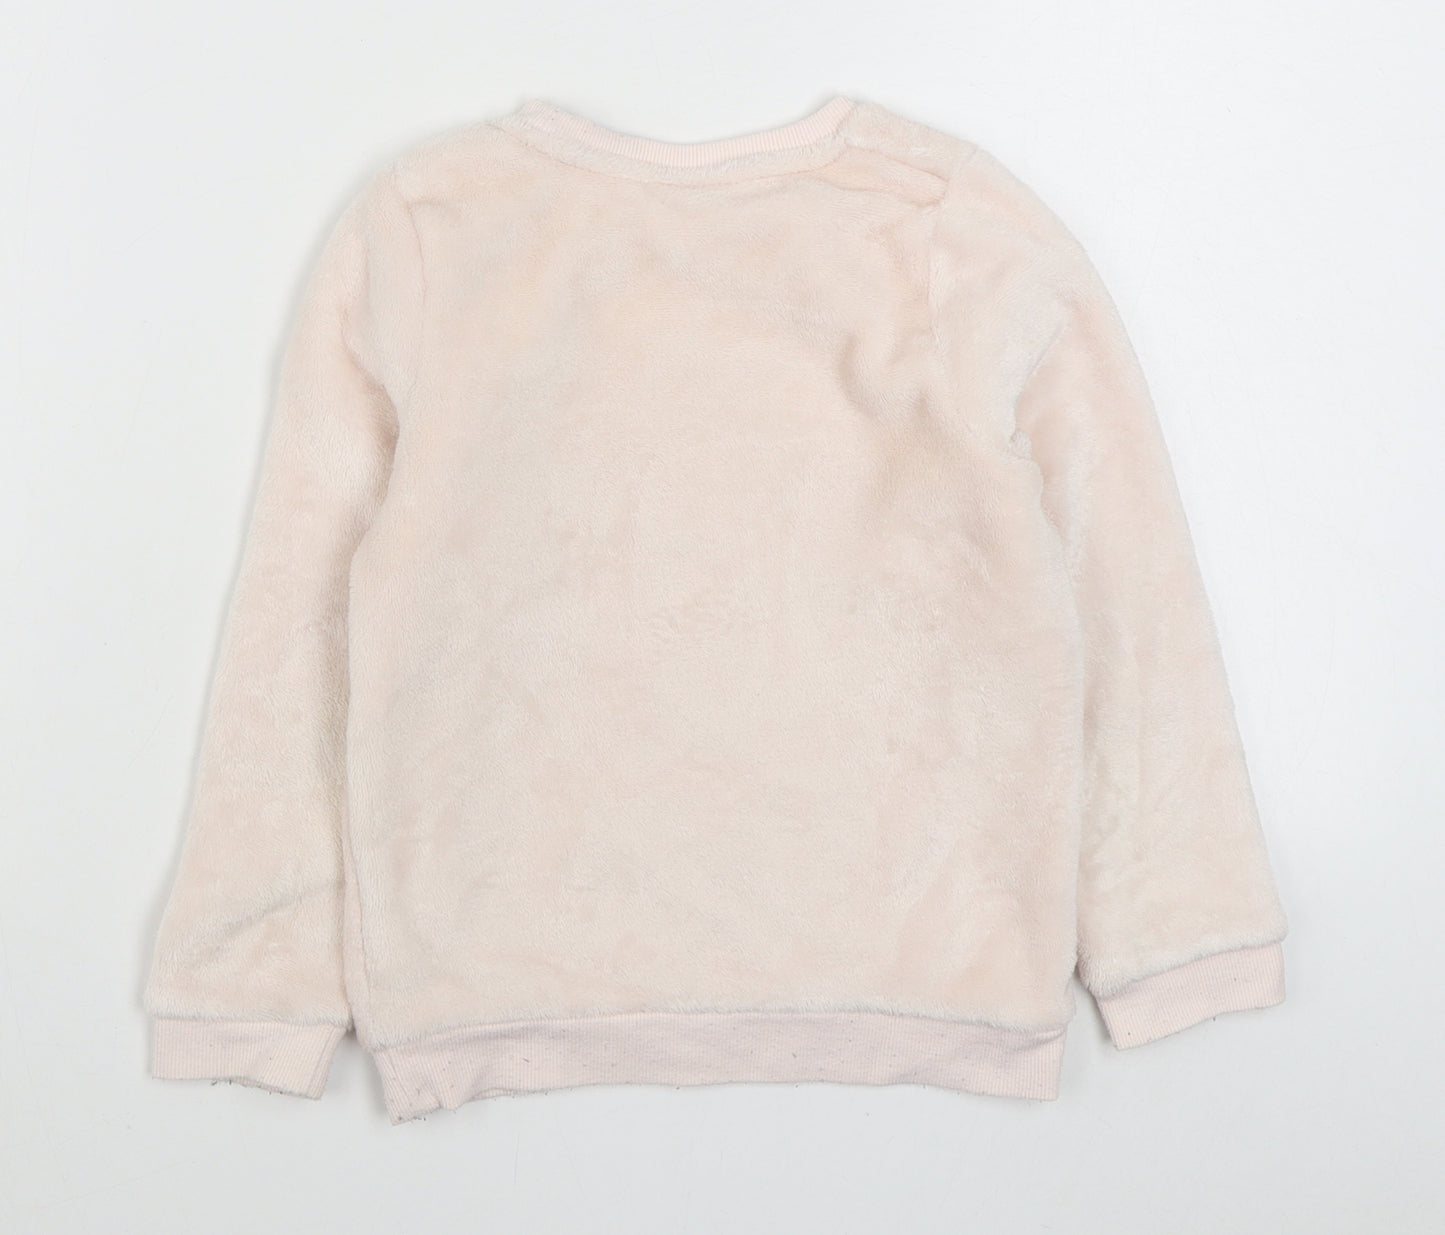 H&M Girls Pink  Polyester Top Pyjama Top Size 5-6 Years  Pullover